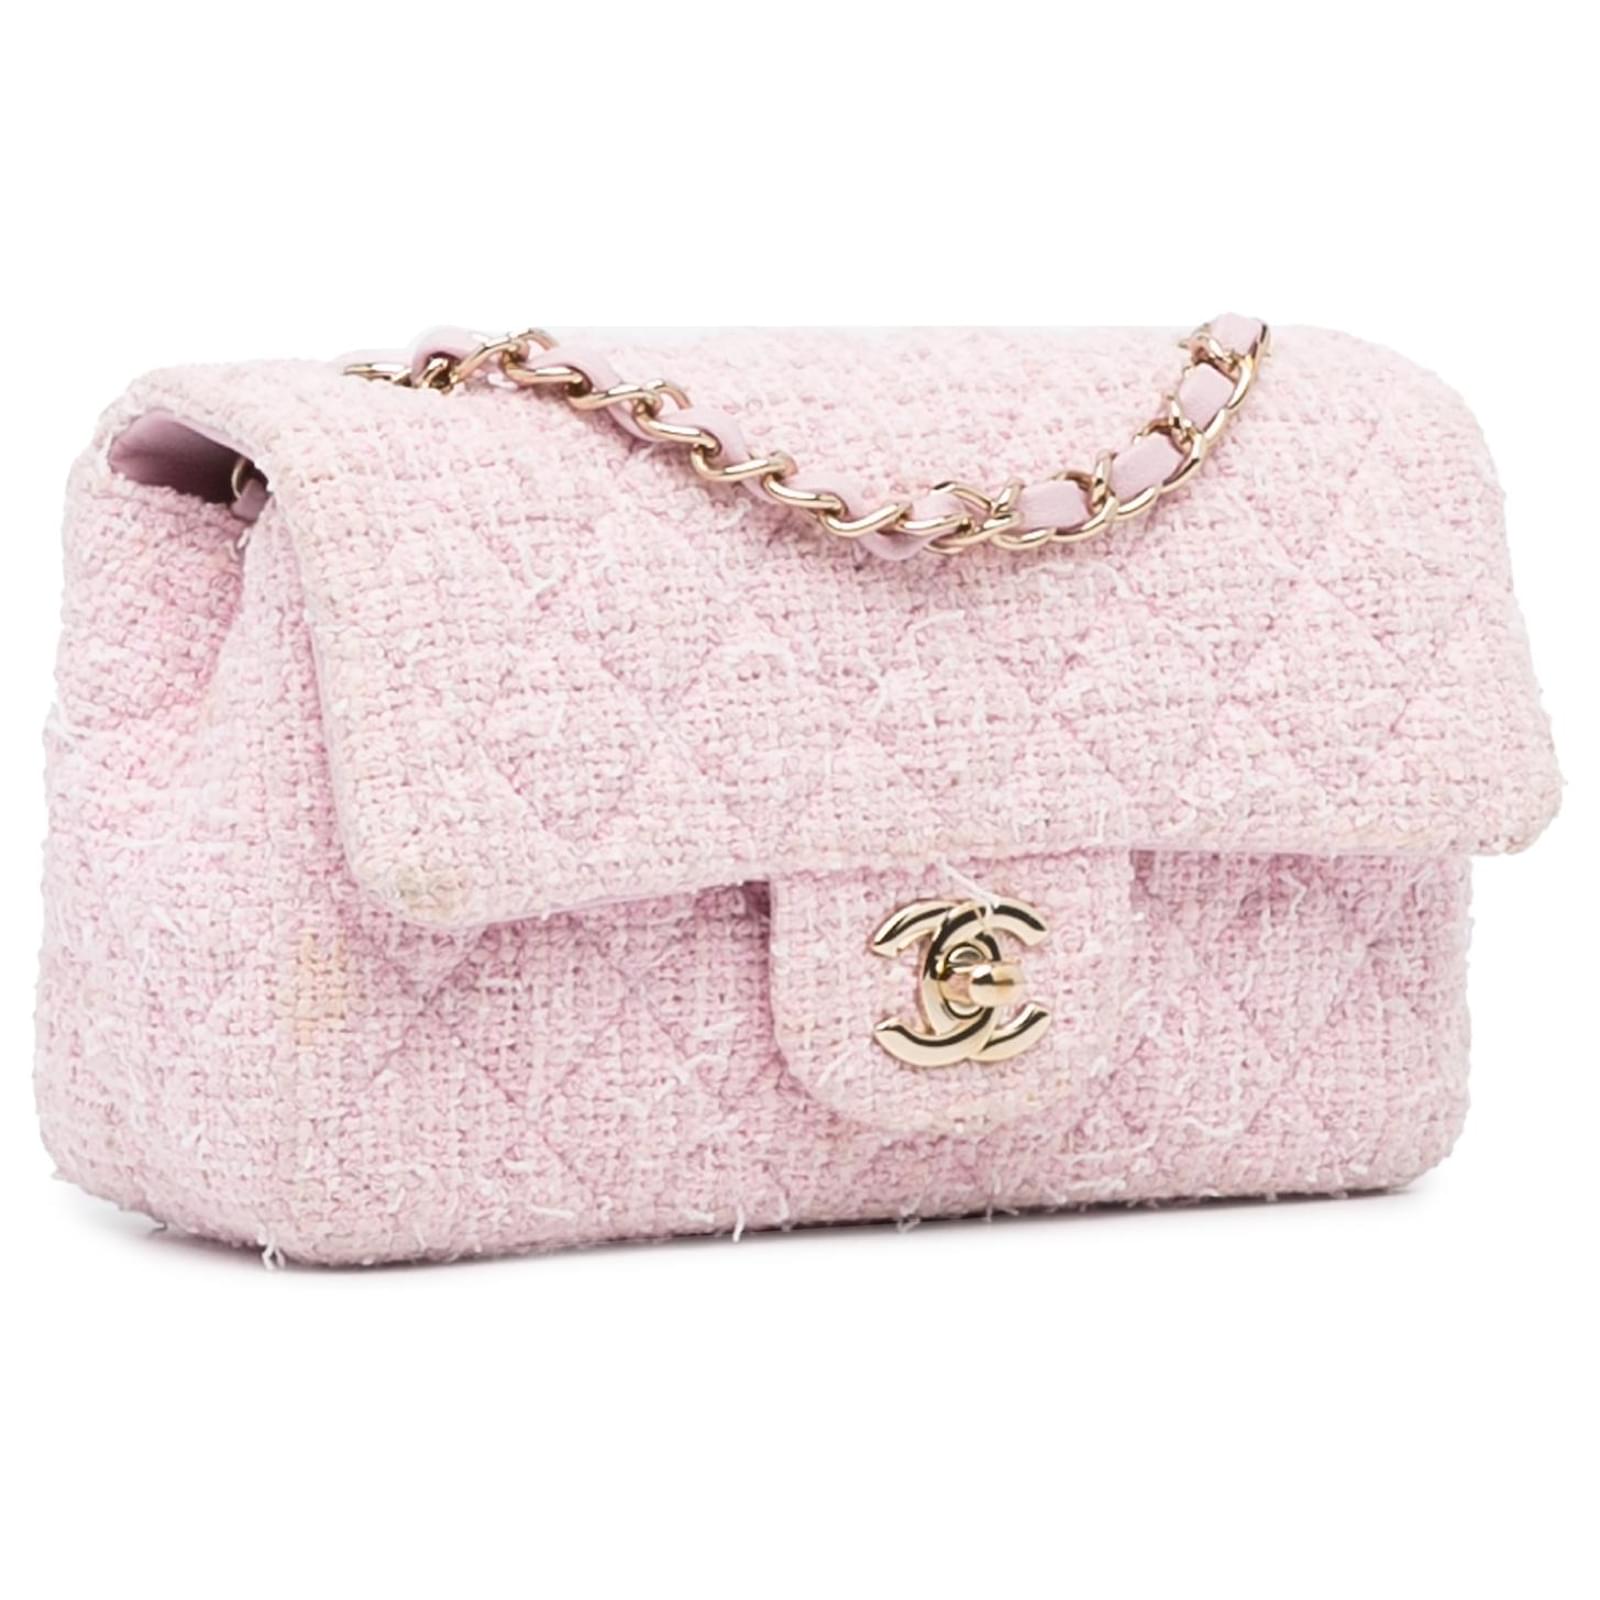 Chanel White/Multiicolor Quilted Tweed New Mini Classic Flap Bag Chanel